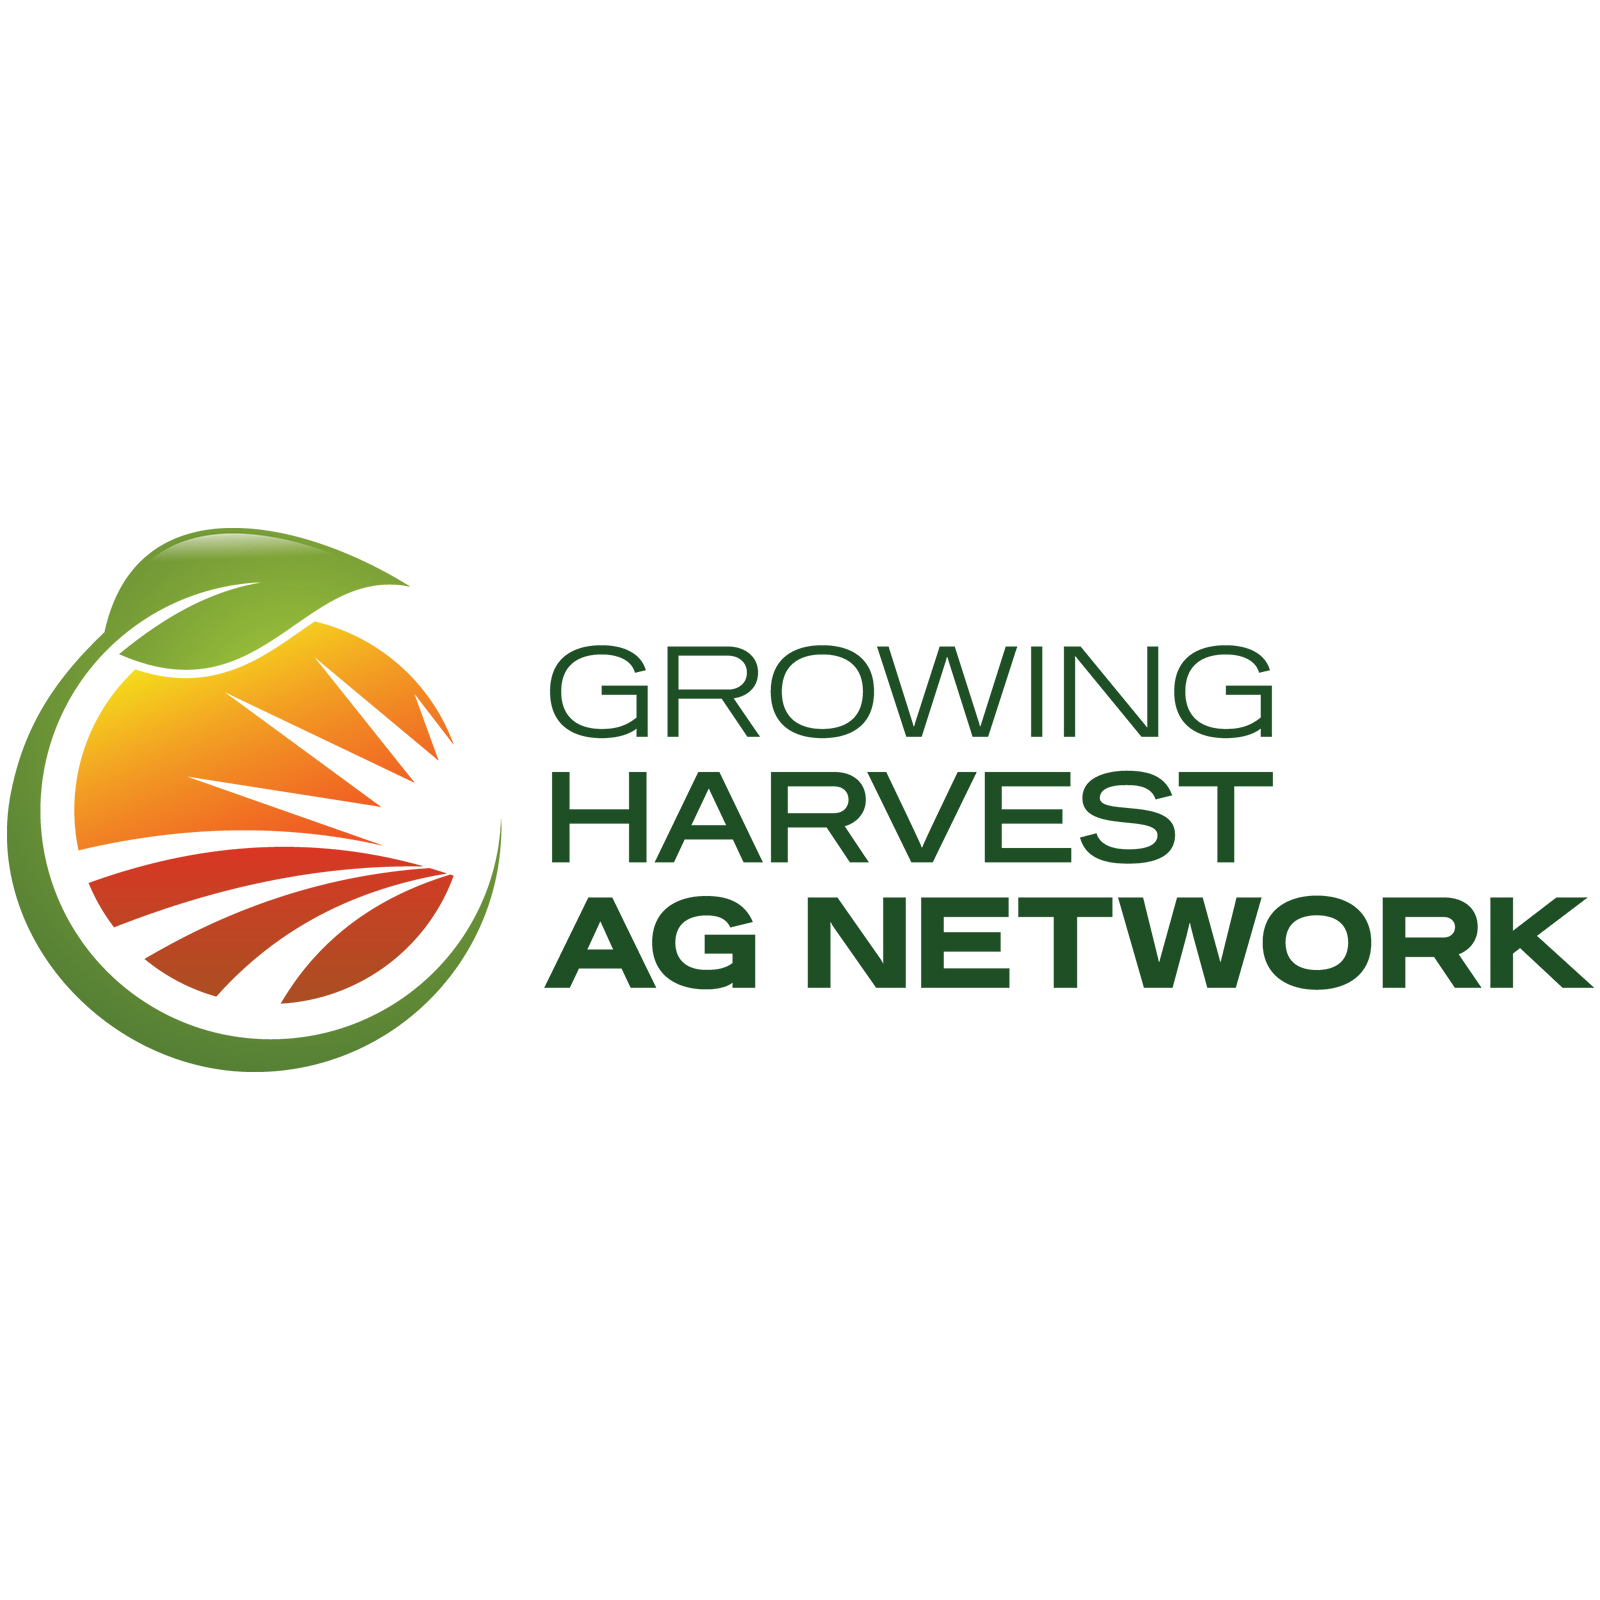 Wednesday Mid-morning Ag News, Feb 17  2021:  Cold Weather Grips Much of the U.S., Virtual Farm Webinars Offer In-Home Education